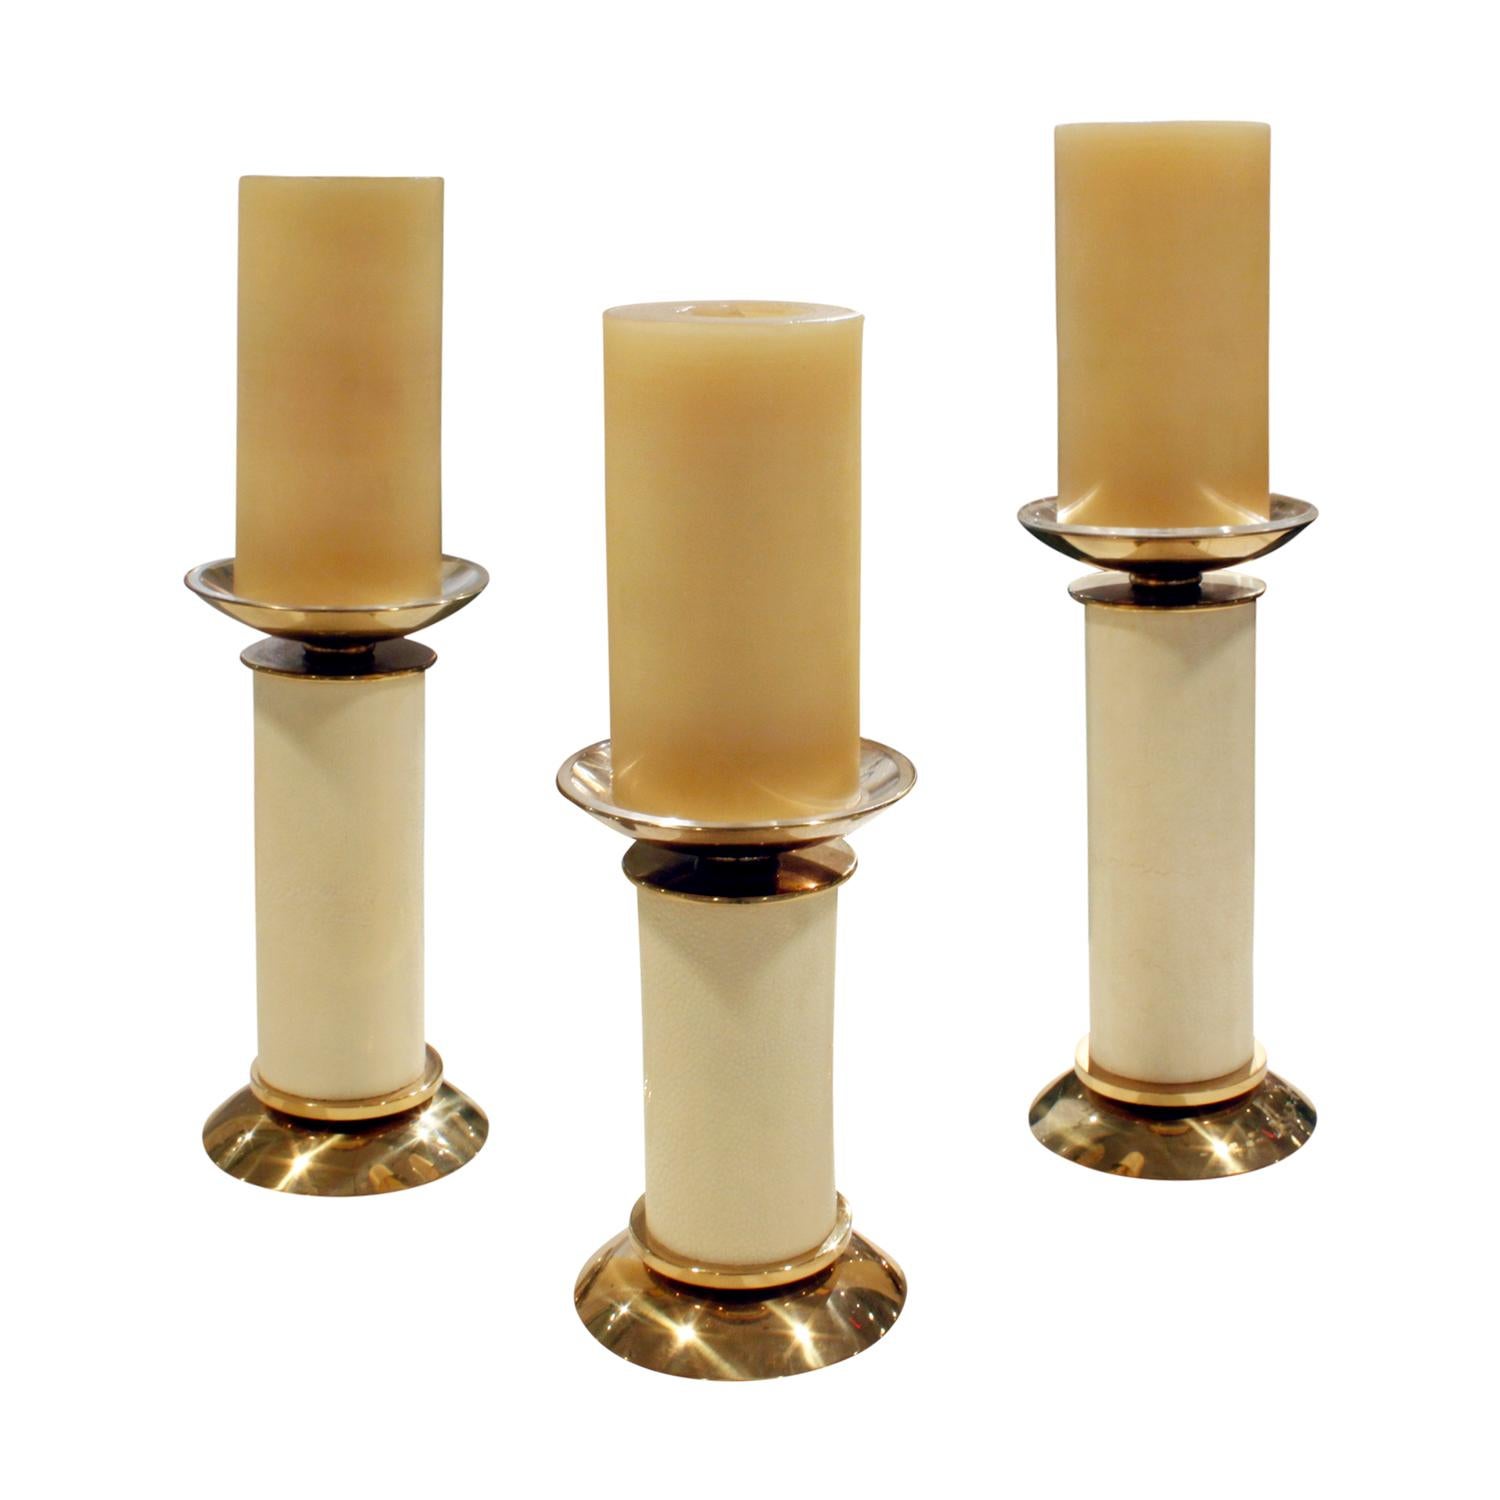 Karl Springer Exceptional Set of 3 Candle Holders in Brass and Shagreen, 1980s